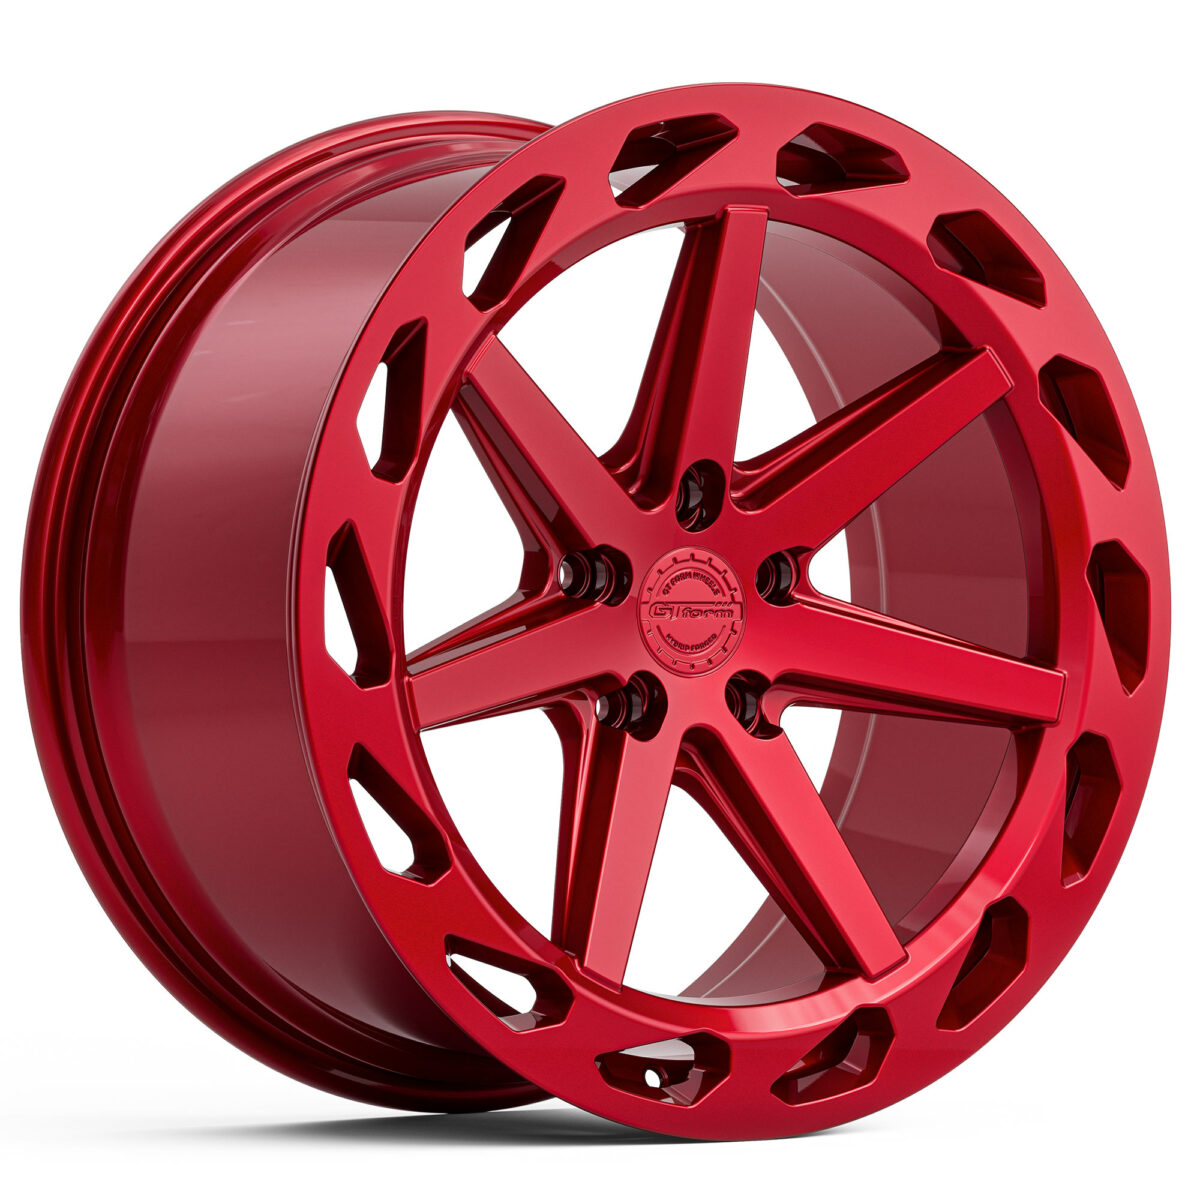 PERFORMANCE WHEELS GT FORM HF4.1 HYBRID FORGED ILLISION RED 20X9 20X10 20X11 STAGGERED RIMS